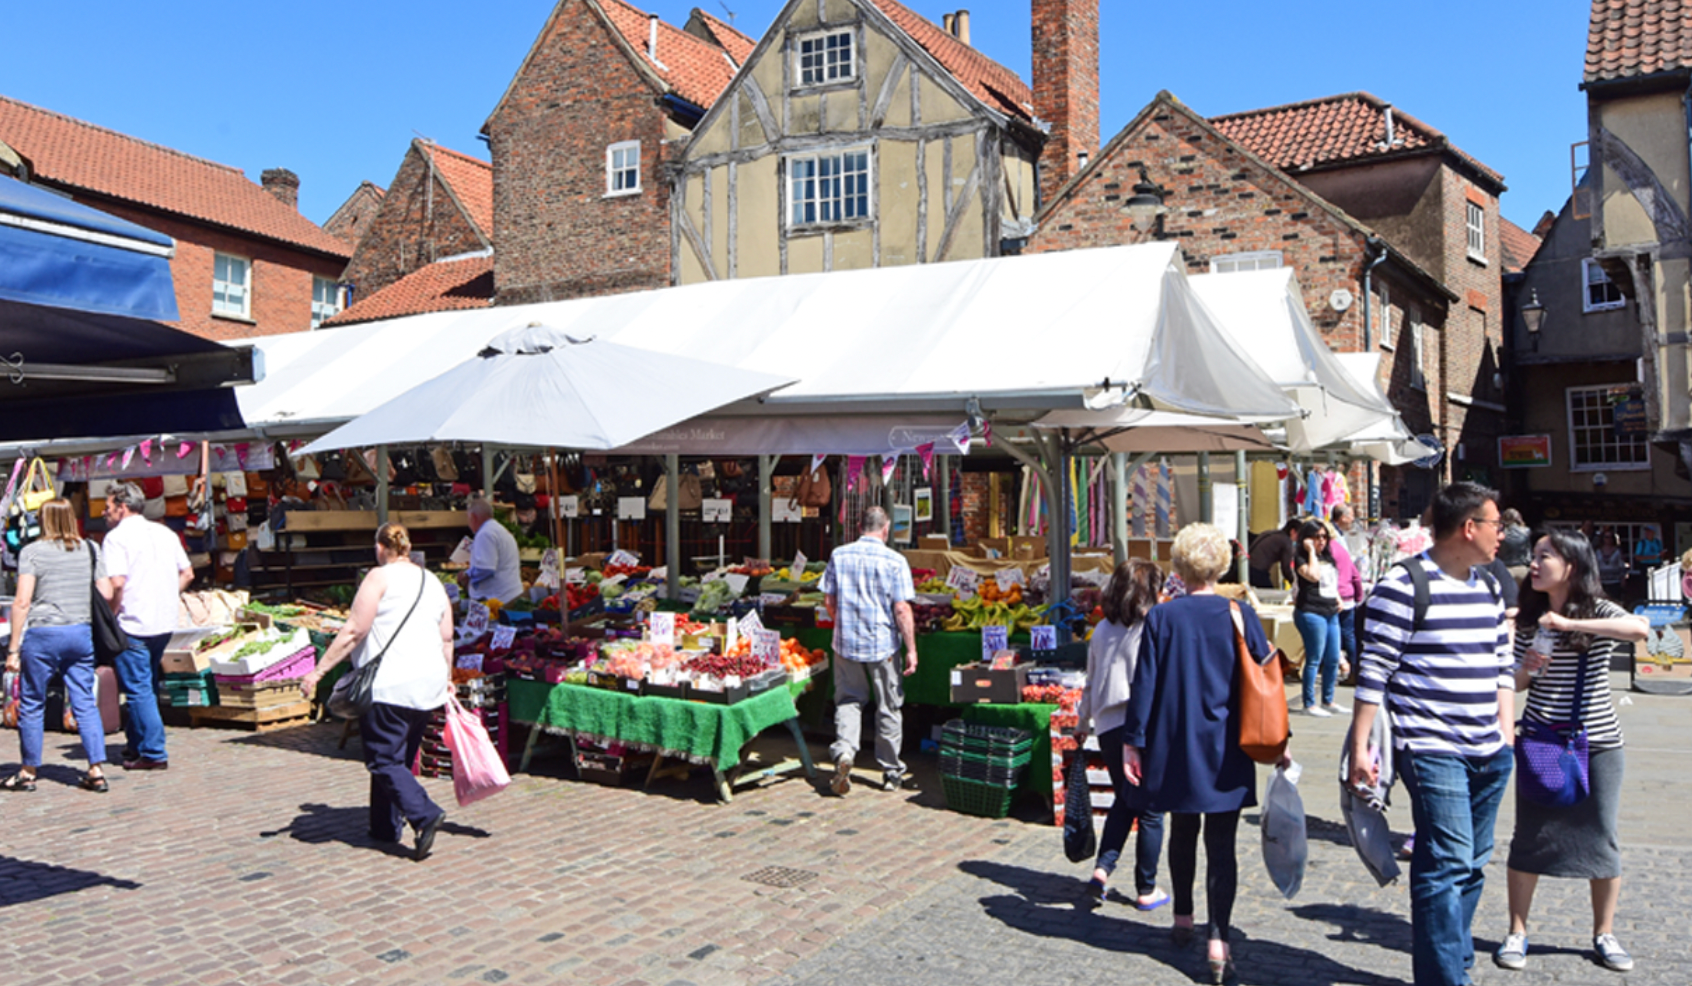 The Shambles Market in York: A Historic Hub at the Heart of the Community